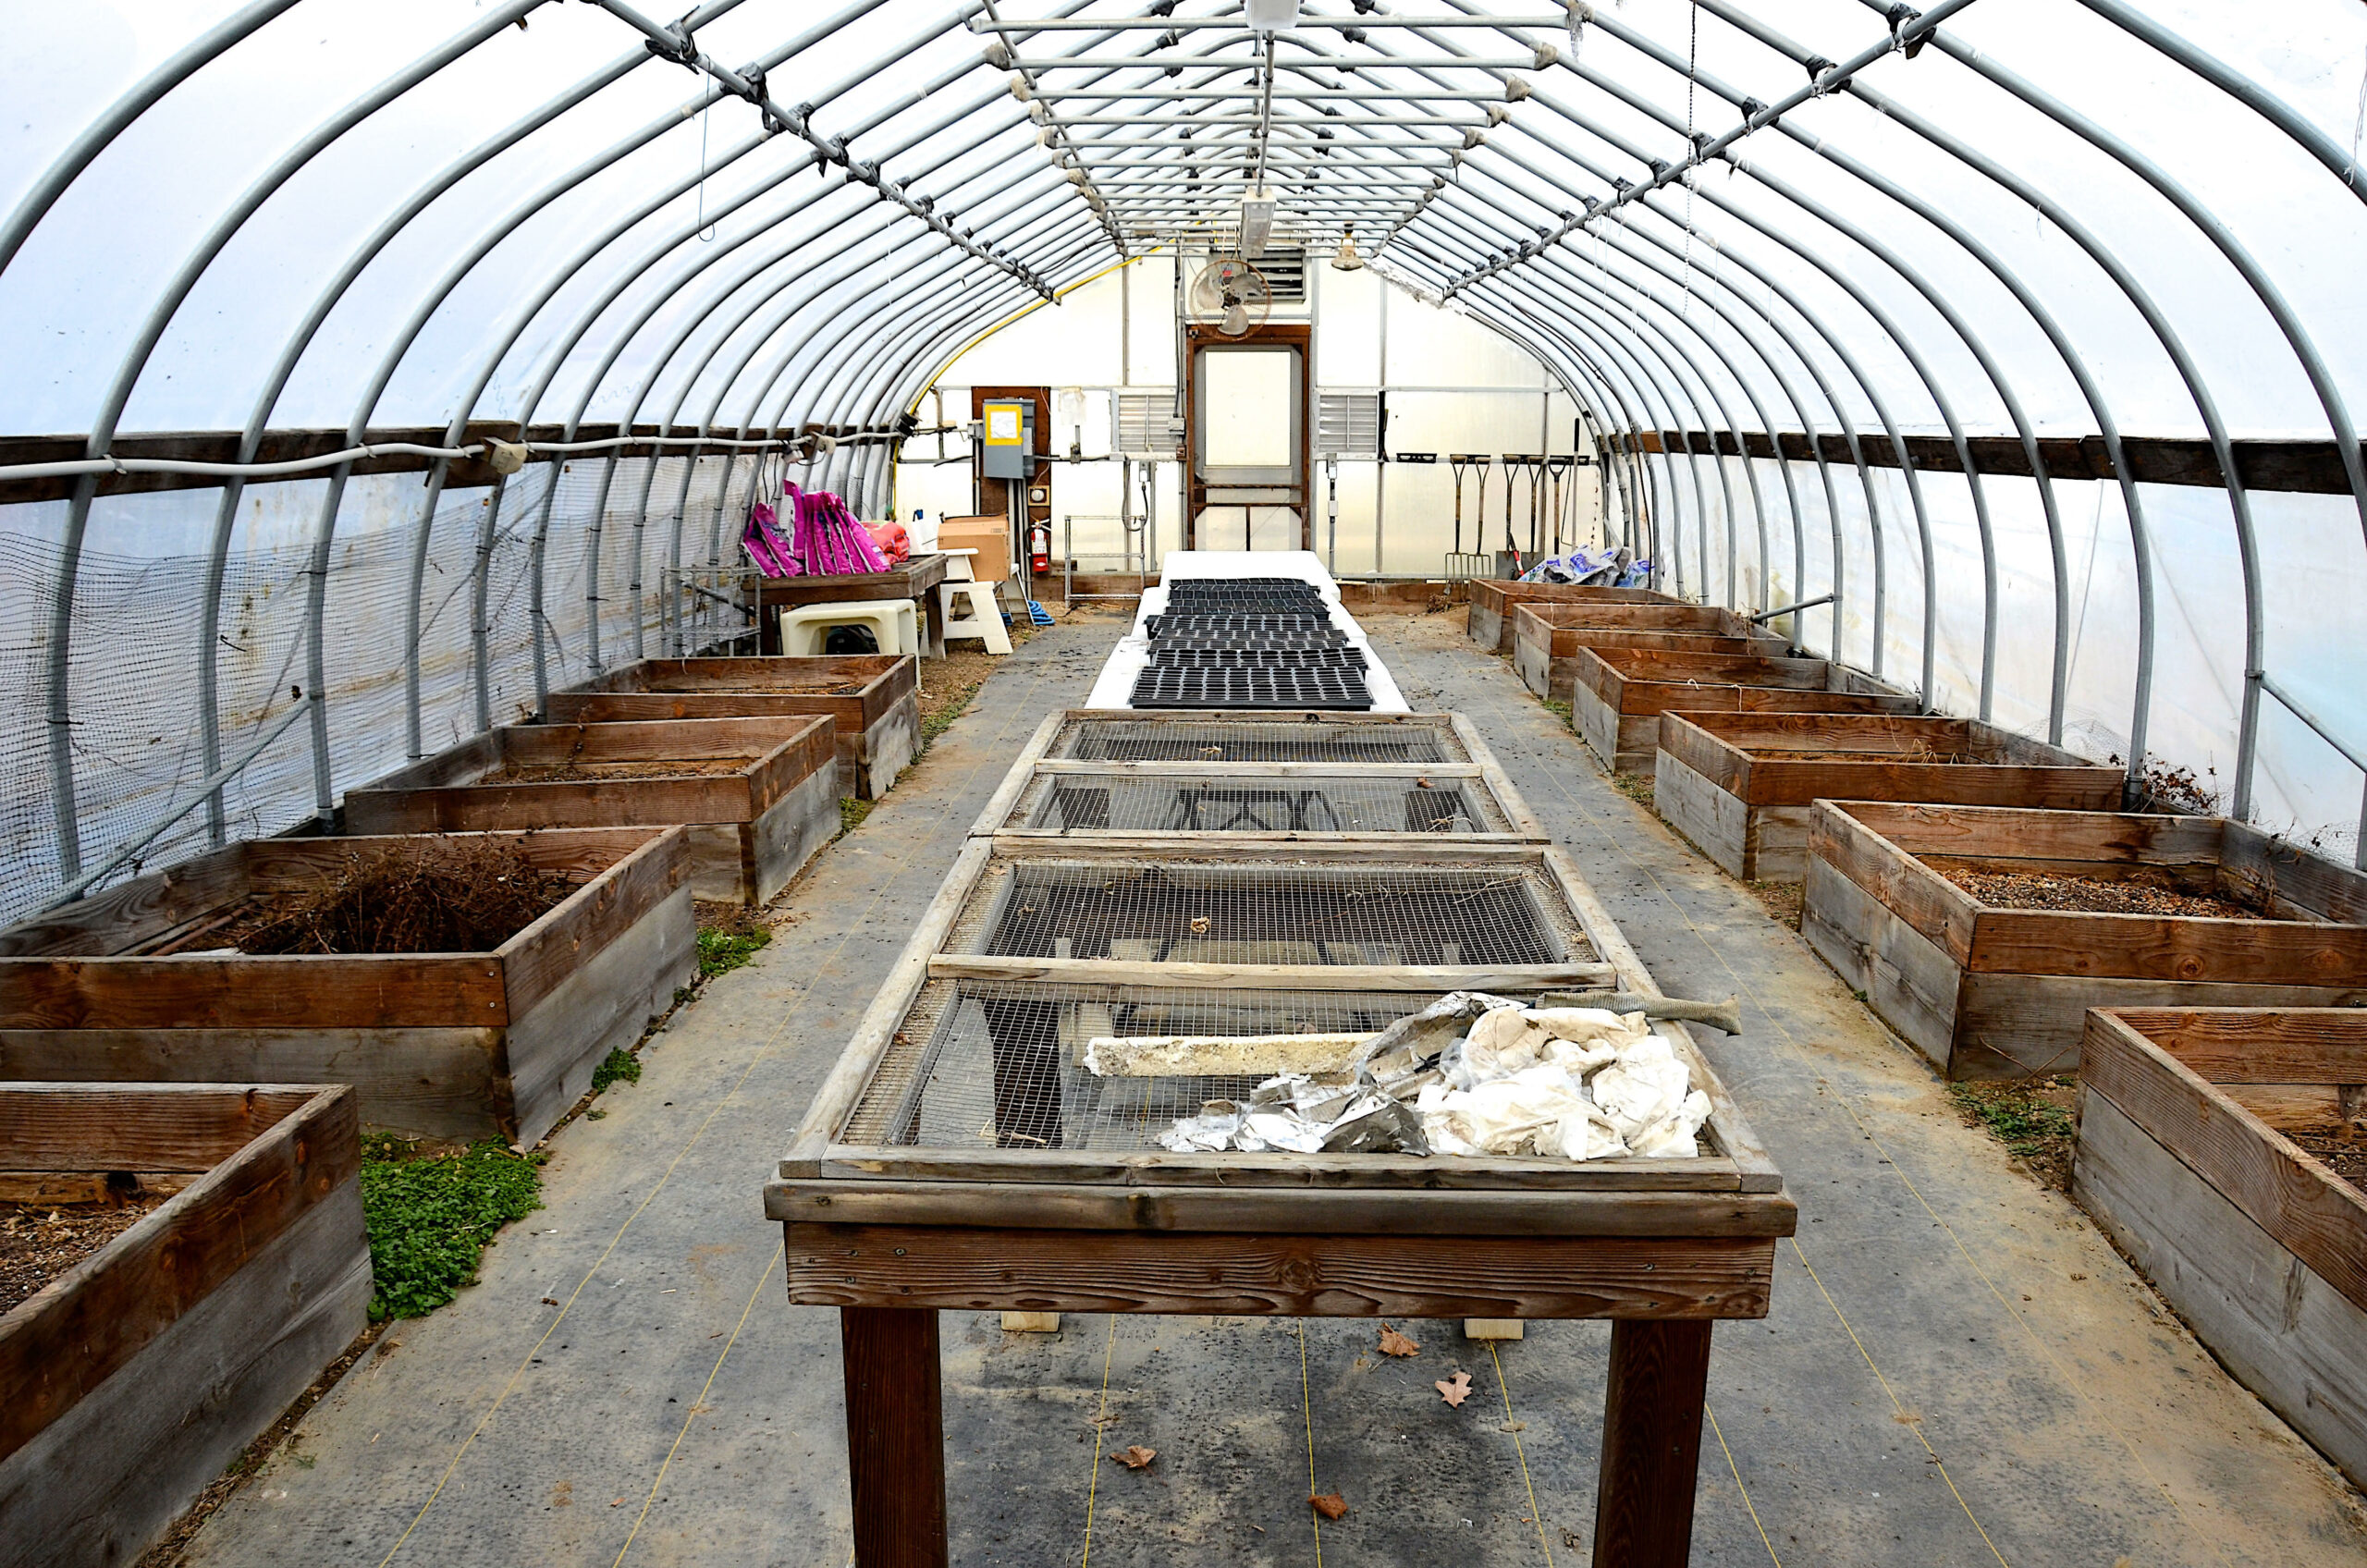 A look inside Springs School's greenhouse, which is in need of updates and repairs. KYRIL BROMLEY